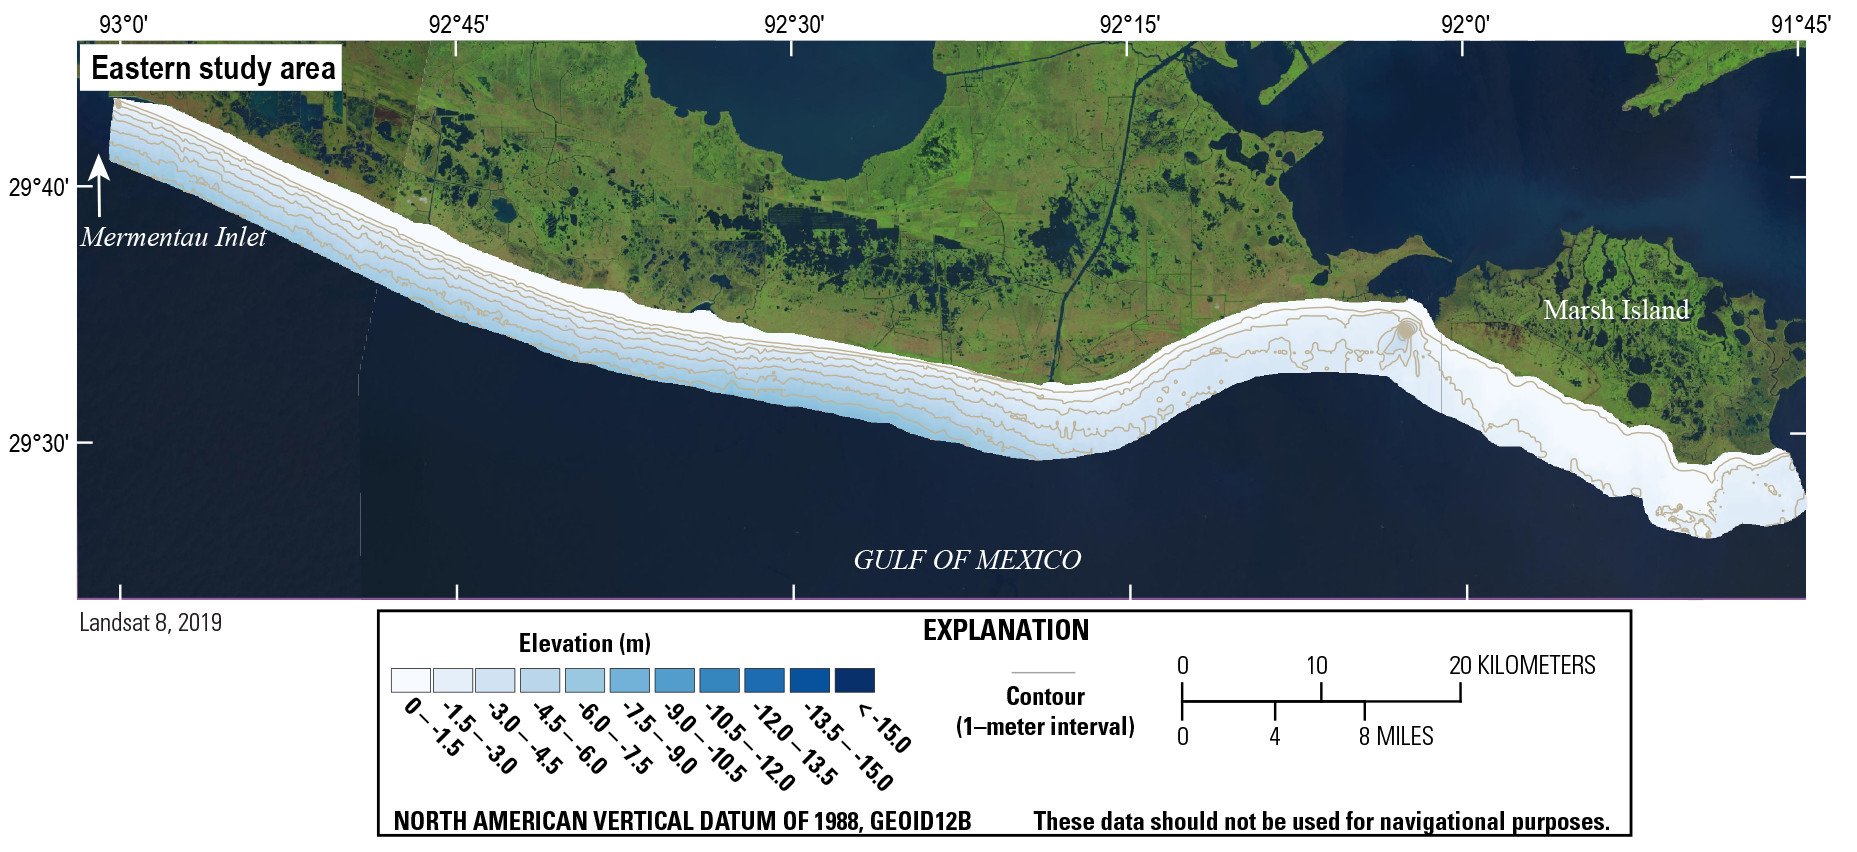 Figure 14. Labels are on the map for Mermentau Inlet, Marsh Island, and the Gulf of
                     Mexico.